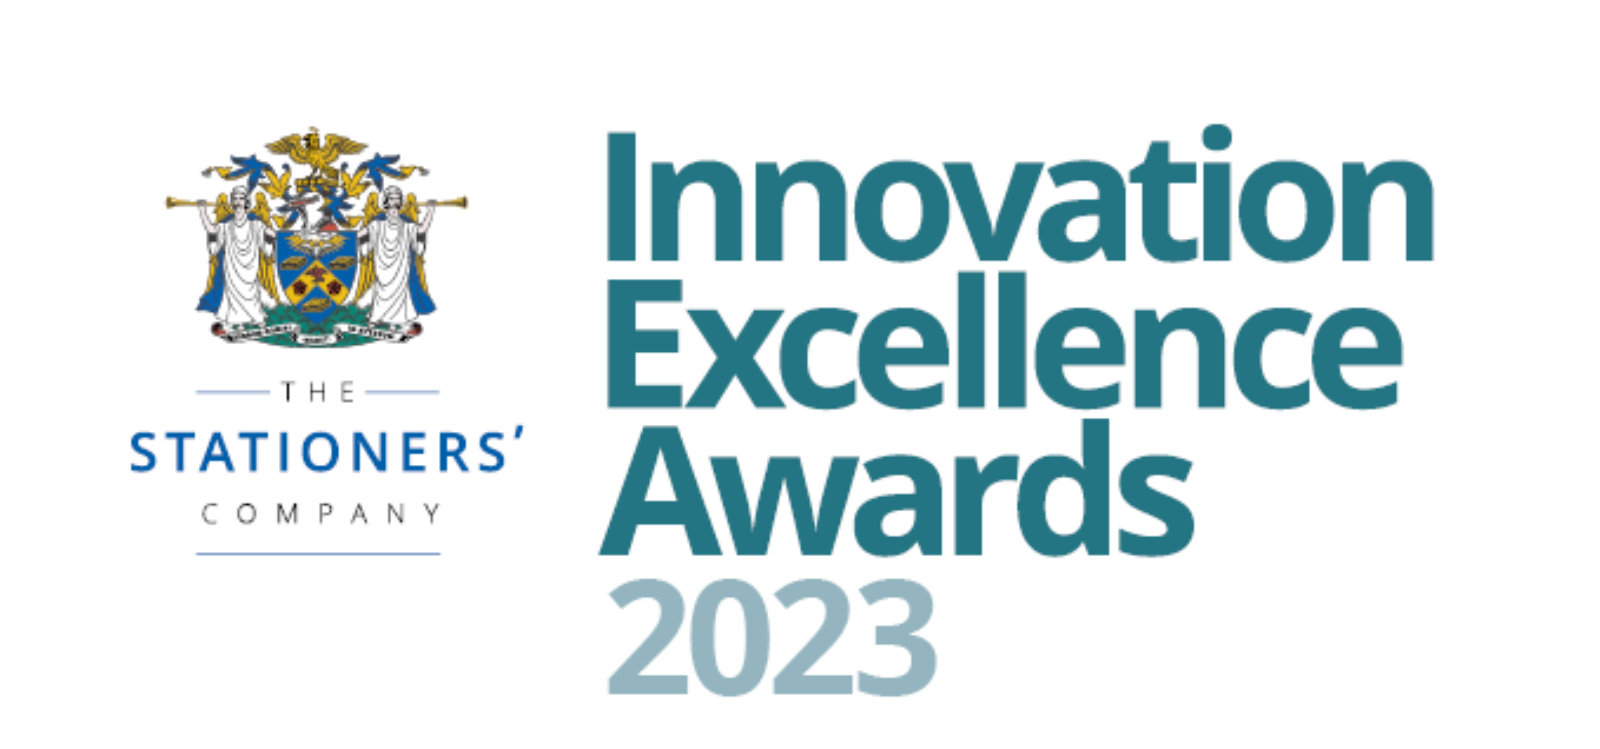 Innovation Excellence Awards Ceremony and Lunch 2023